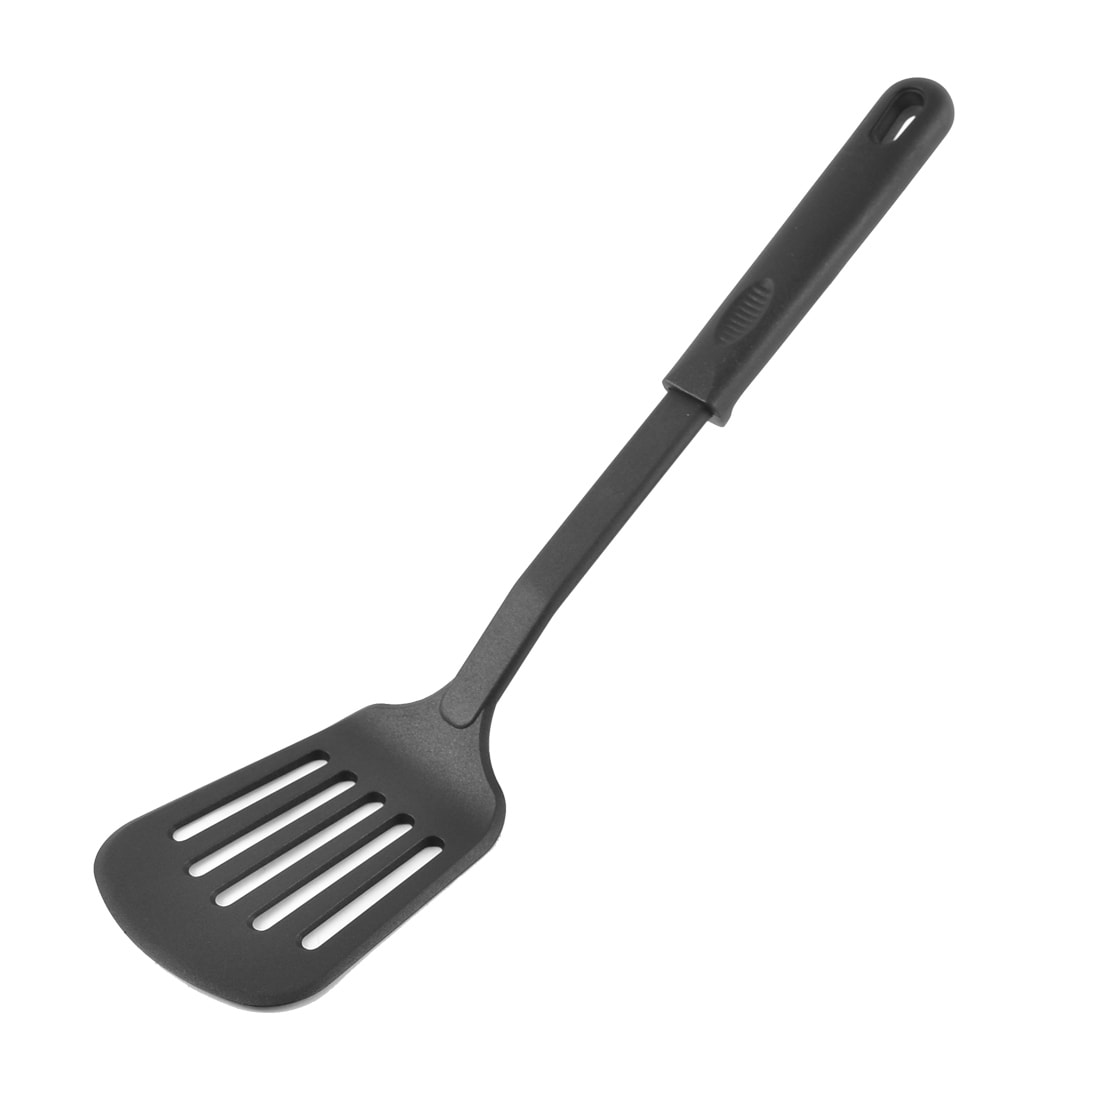 Stainless Steel Starchef Silicone Slotted Turner Spatula Heat Resistant Non-Stick Soft Grip Black 